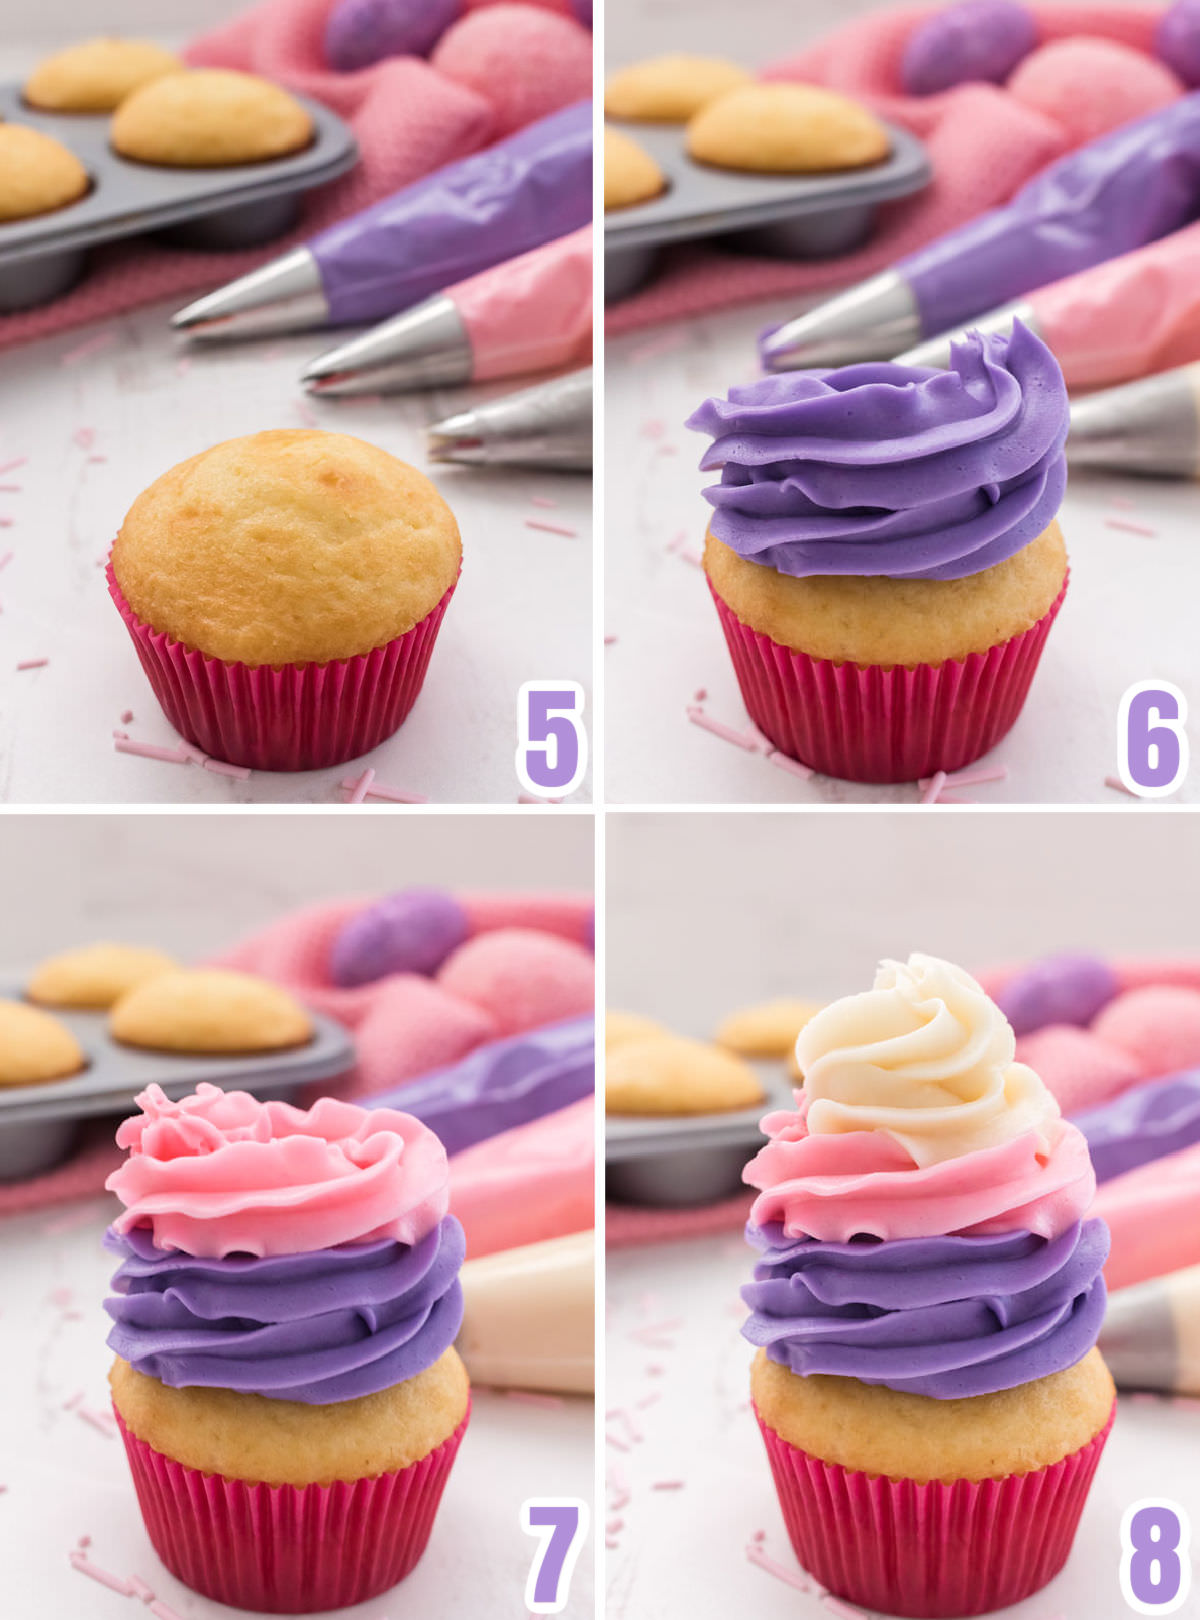 Collage image showing how to make the butter cream frosting swirl for the Easter Cupcakes using purple, pink and white frosting.